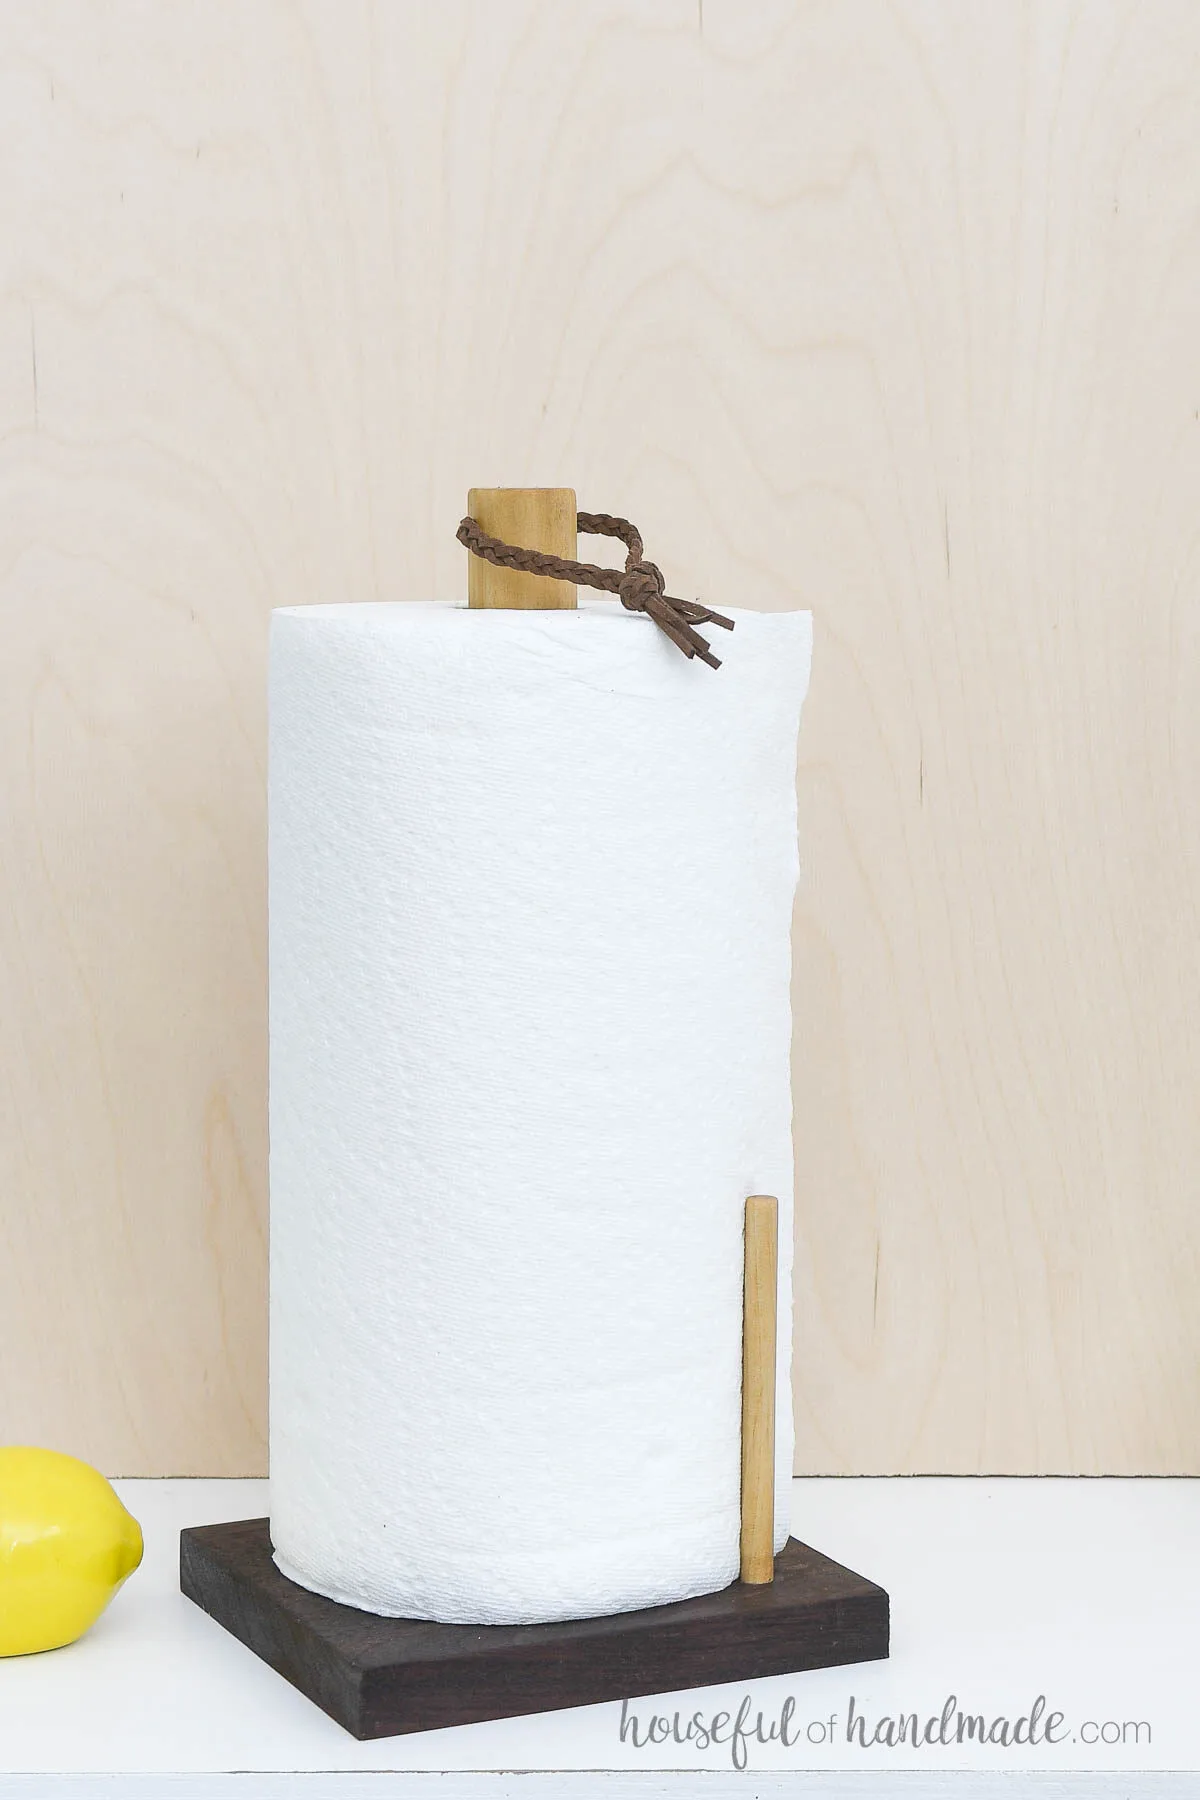 How To Hide Paper Towel Holder? - Tools for Kitchen & Bathroom